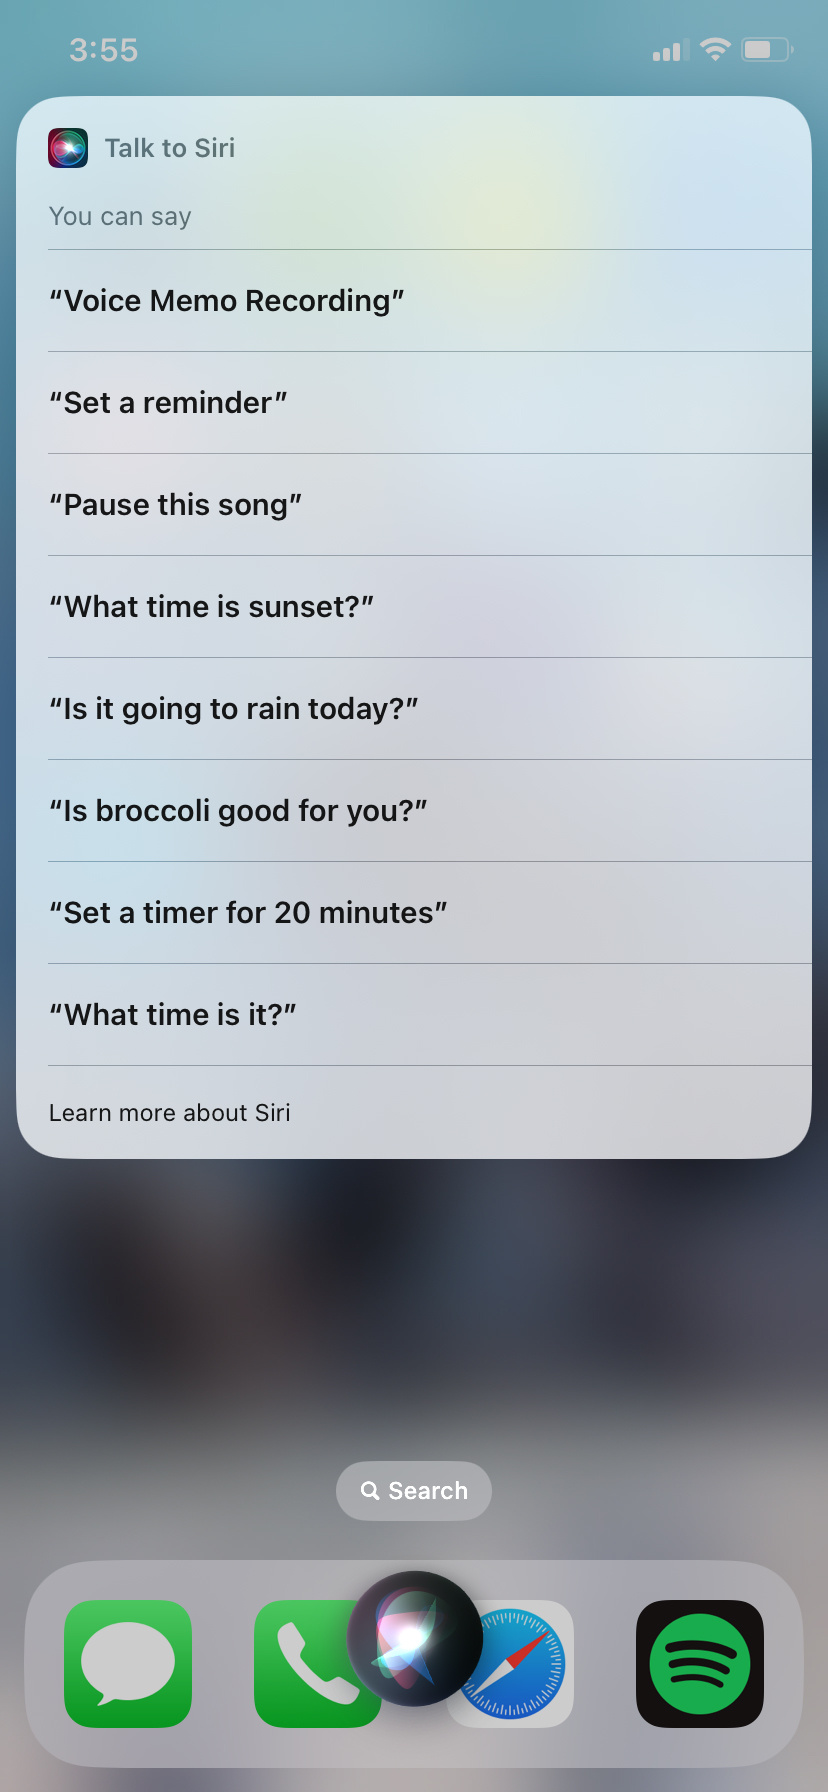 Screenshot of Talk to Siri dialog. You can say Voice Memo Recording, Set a reminder, Pause this song, What time is sunset? Is it going to rain today? Is broccoli good for you? Set a timer for 20 minutes, or What time is it?